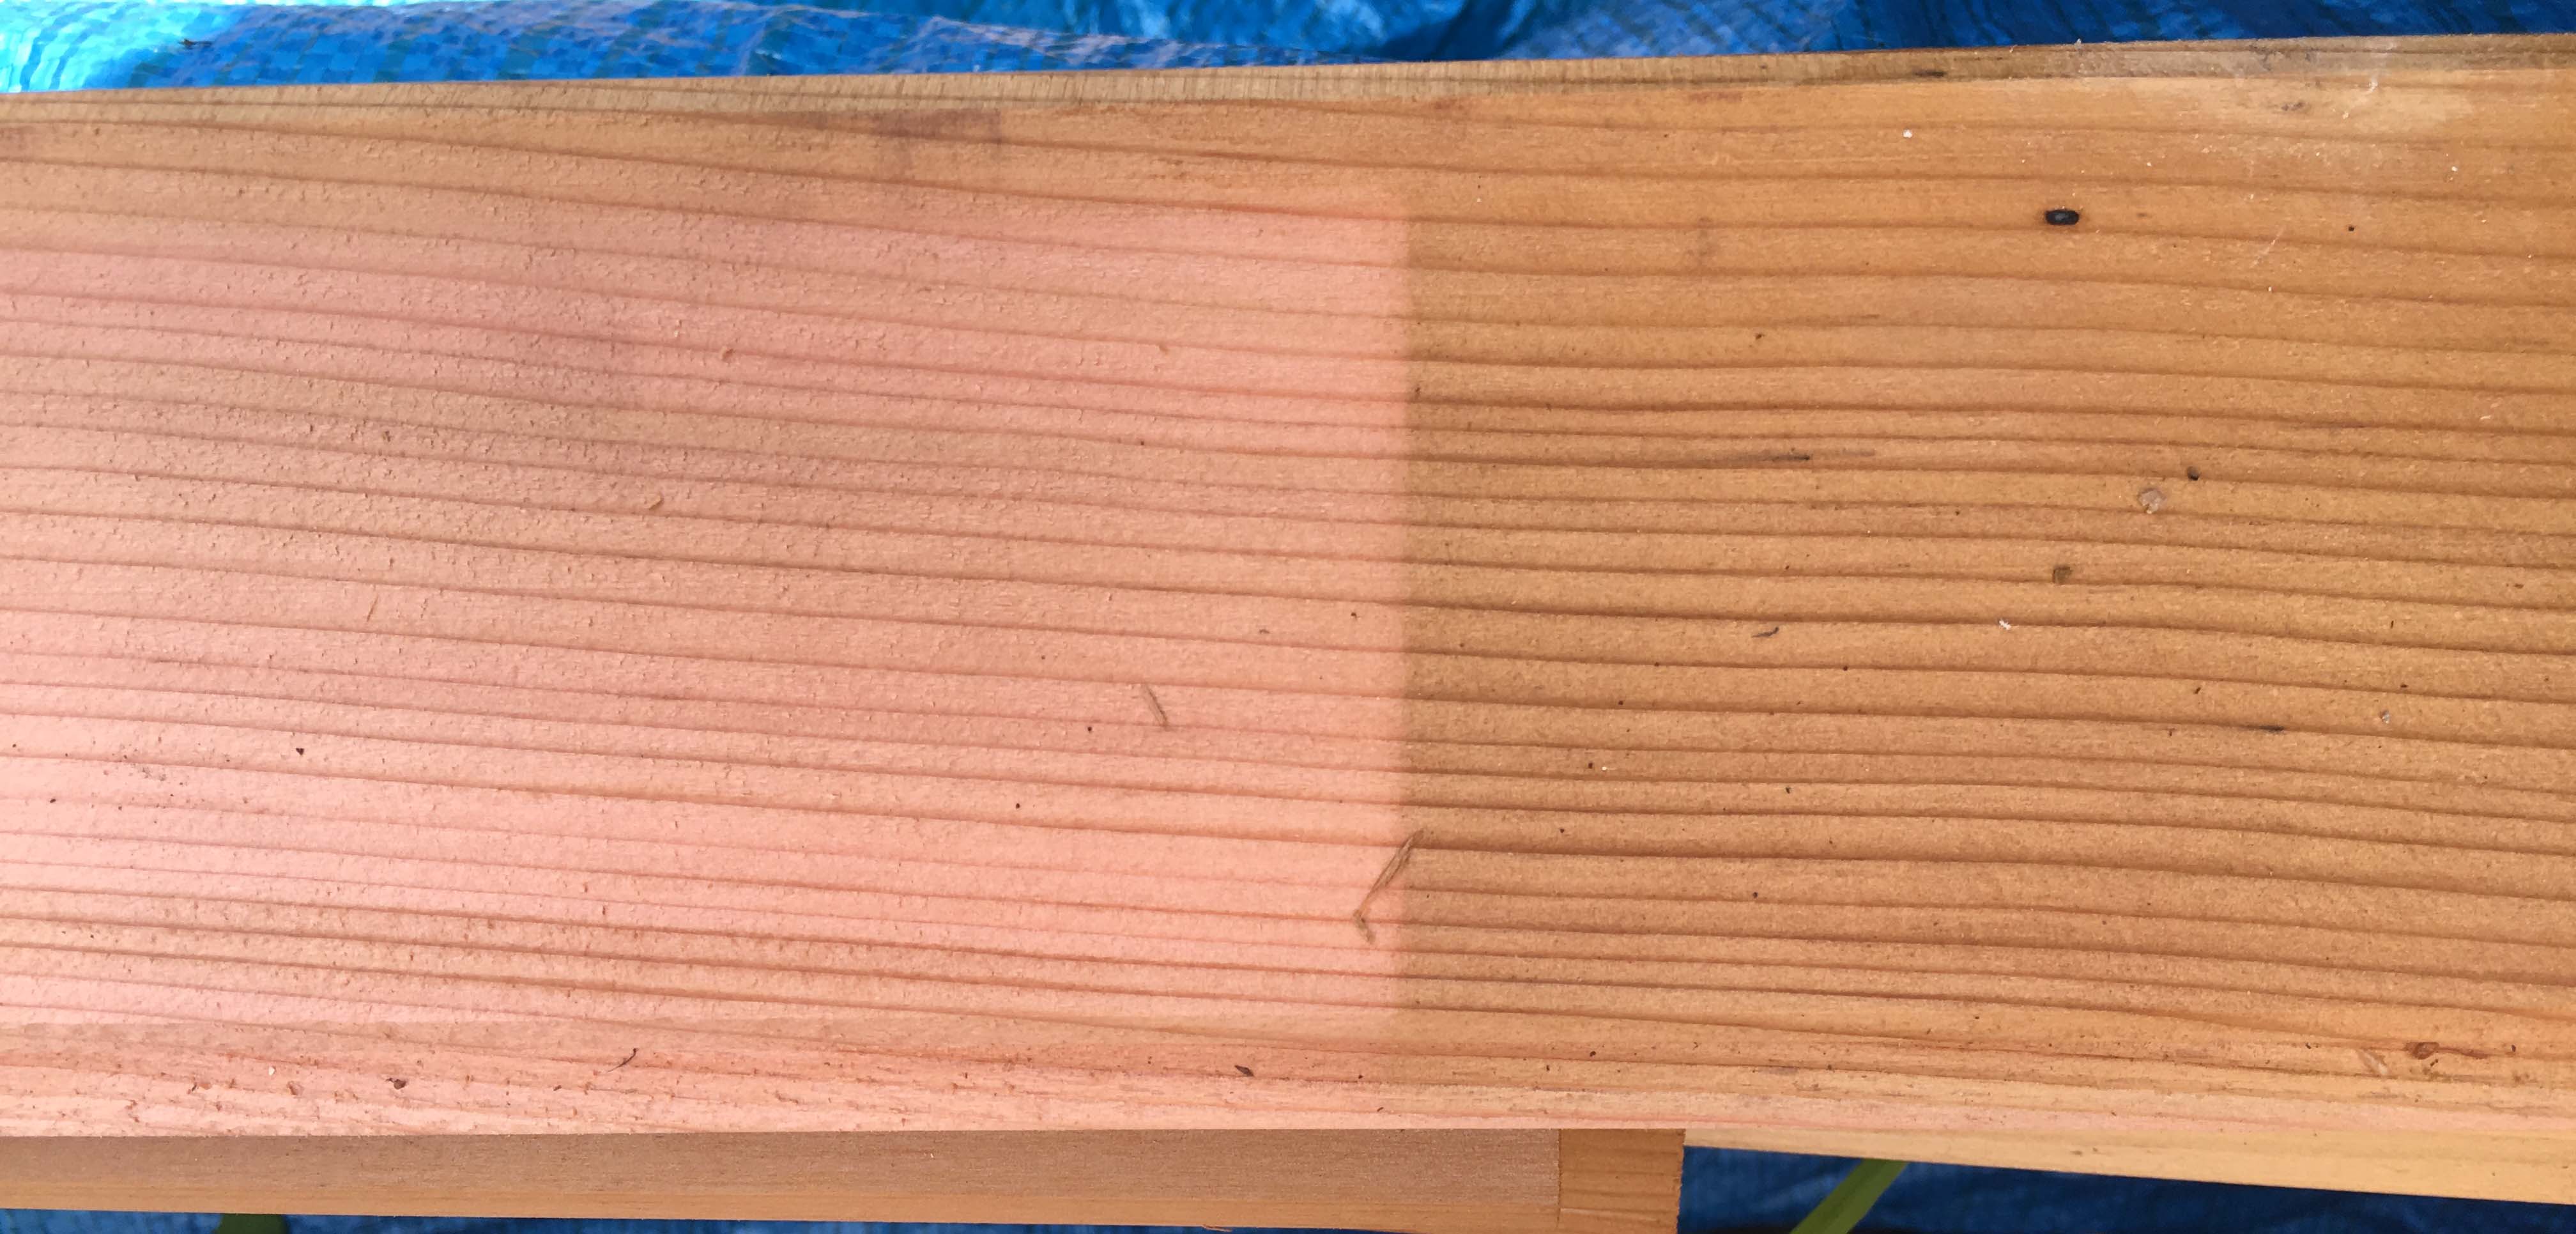 After just 7 days, Cedar cladding can change colour when exposed to strong sunlight